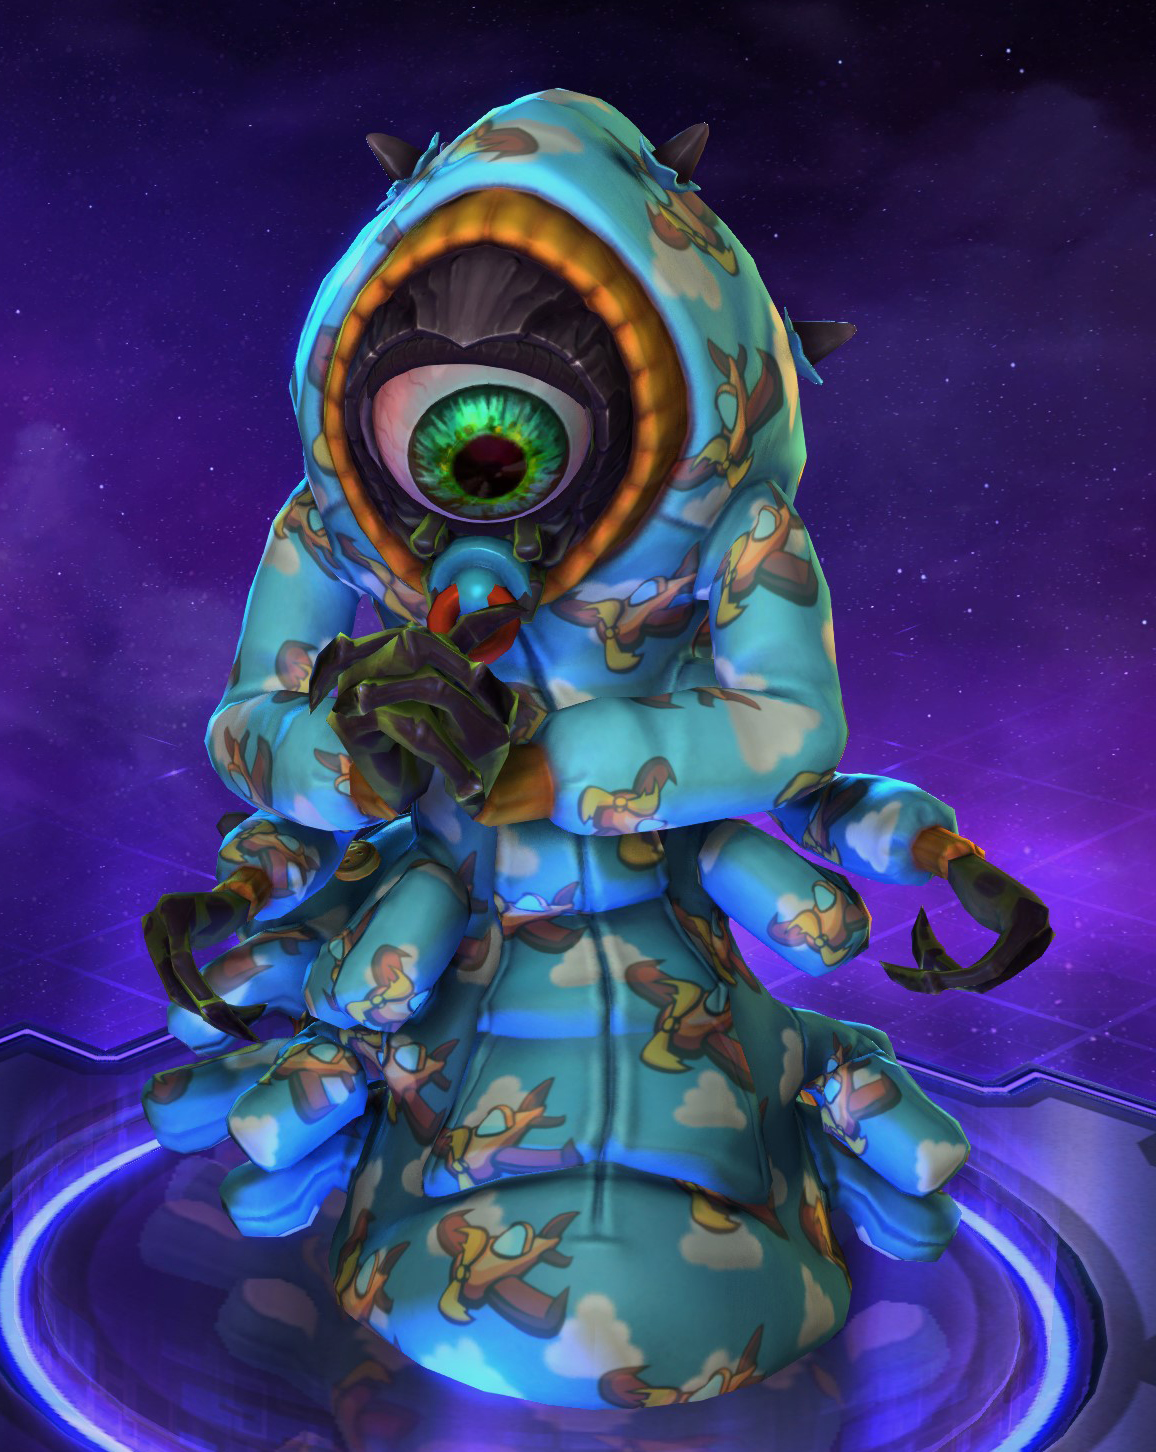 accu Touhou palm Abathur/Skins - Heroes of the Storm Wiki